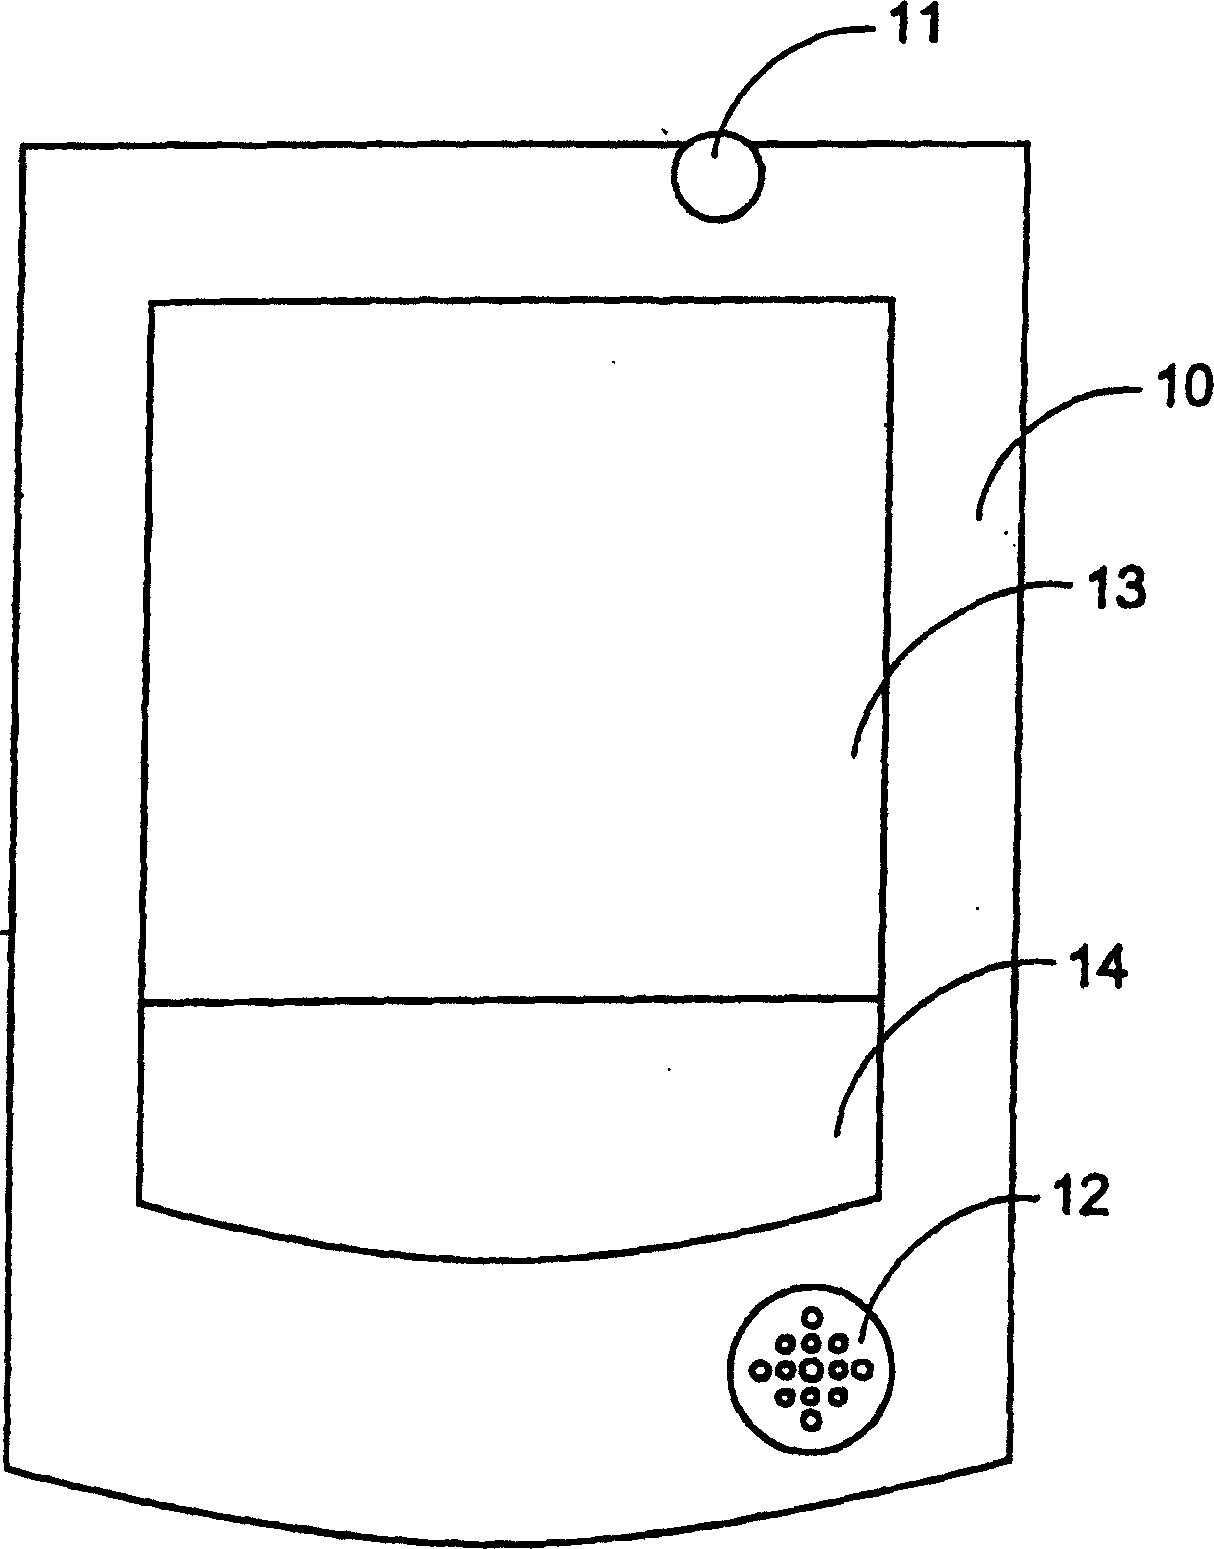 Electronic message leaving device